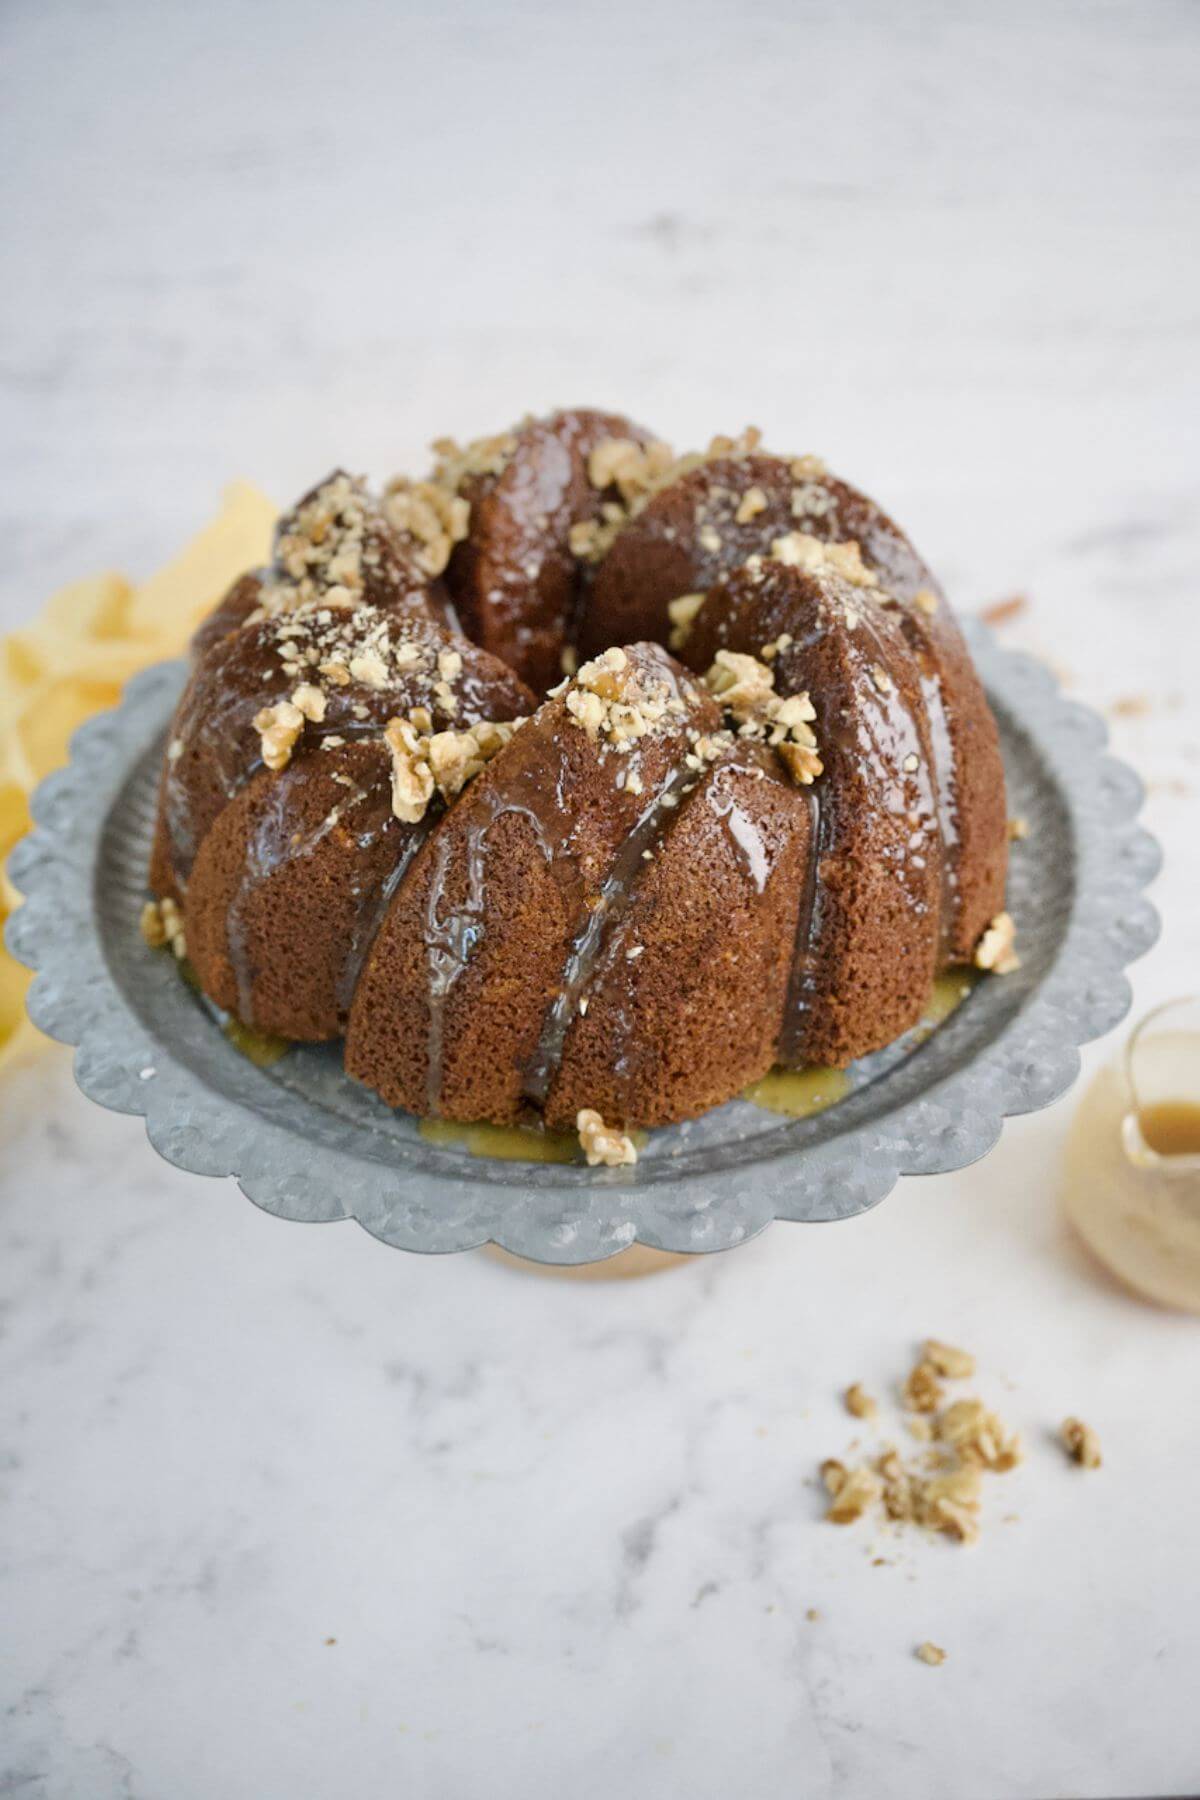 Banana Bread Bundt Cake served on platter topped with walnuts.